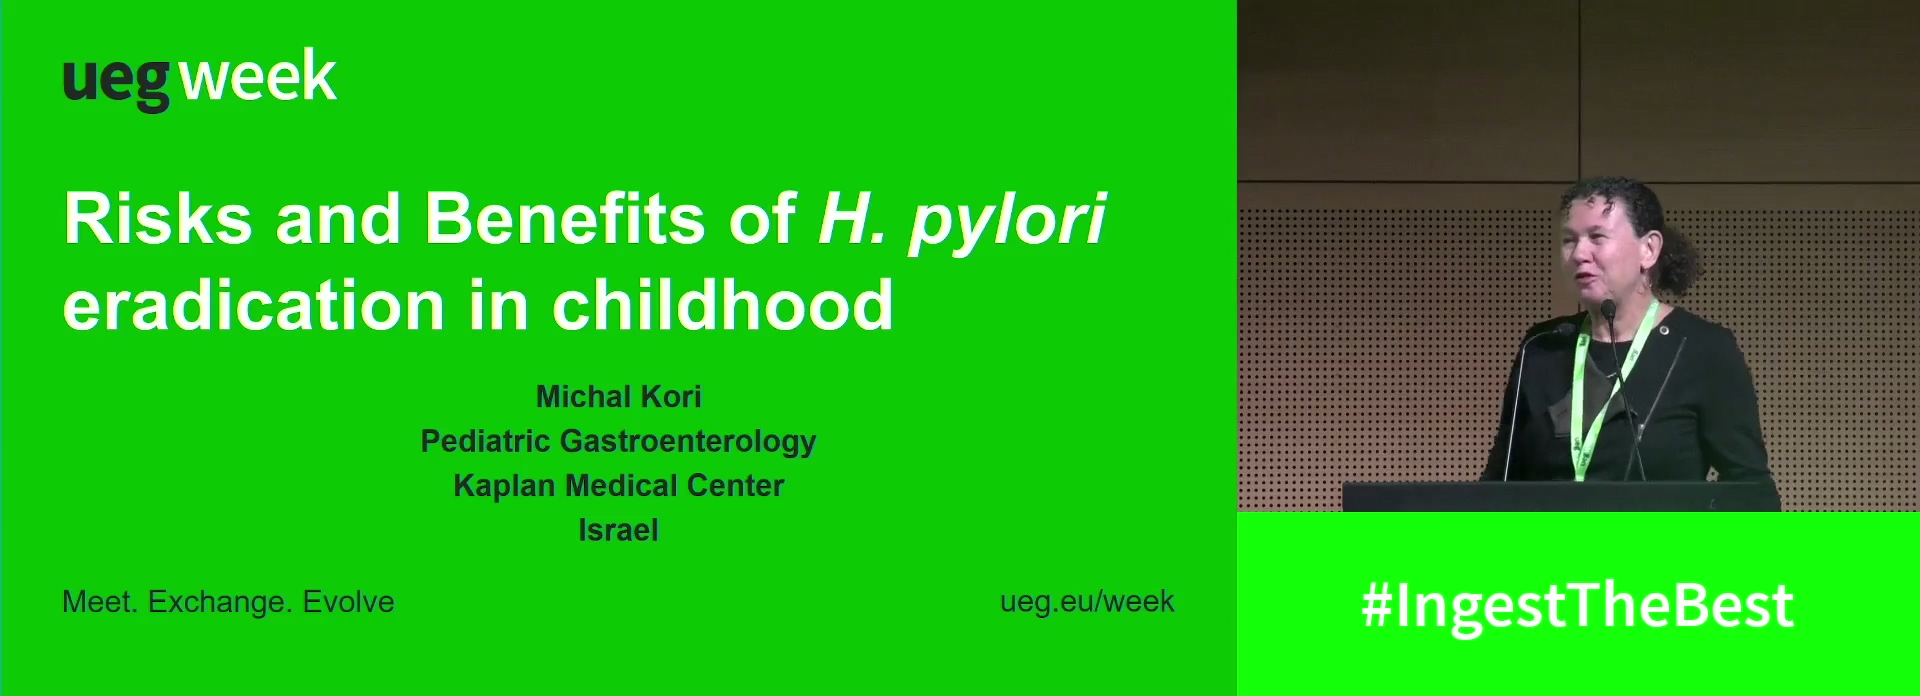 Risks and benefits of H.pylori eradication in childhood